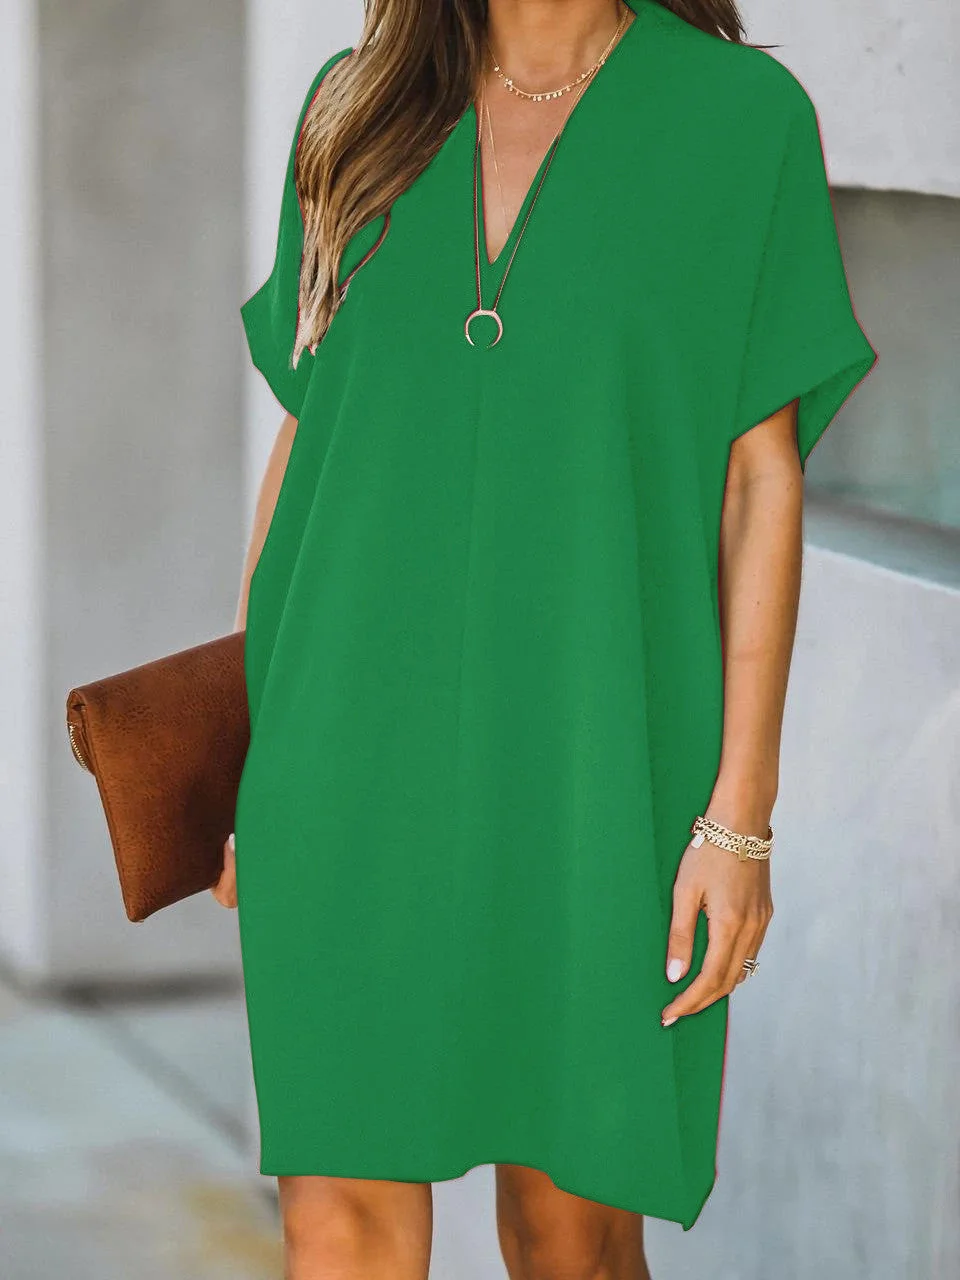 Women plus size clothing Women's Short Sleeve V-neck Solid Color Casual Dress-Nordswear